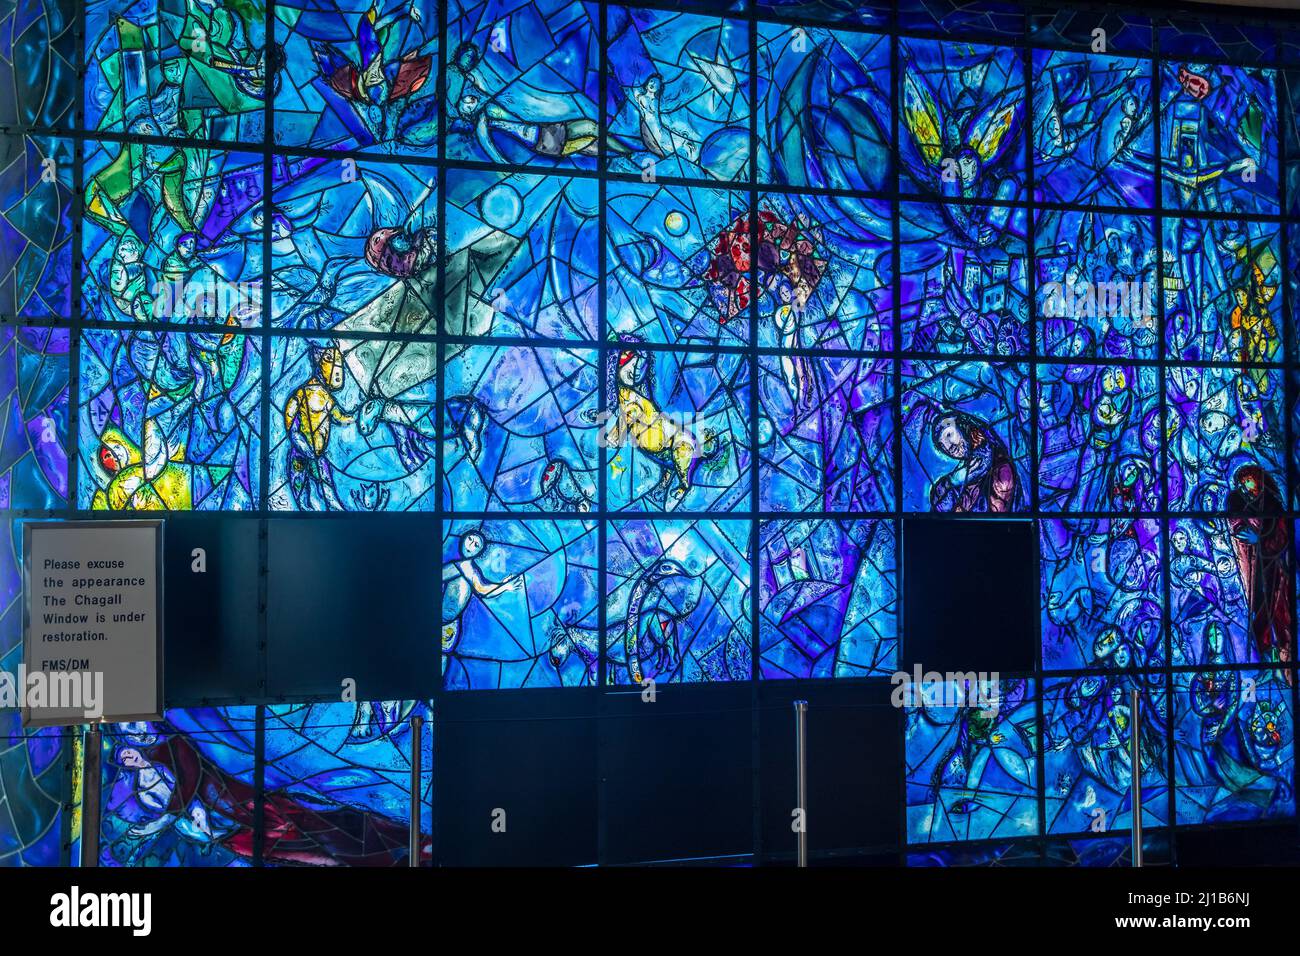 STAINED GLASS ENTITLE 'PEACE' BY THE FRANCO-RUSSIAN PAINTER MARC CHAGALL IN THE UNITED NATIONS ORGANIZATION HEADQUARTERS IN NEW YORK, PEACE IN THE WORLD, UNO, MIDTOWN MANHATTAN, NEW YORK CITY, NEW YORK, USA Stock Photo